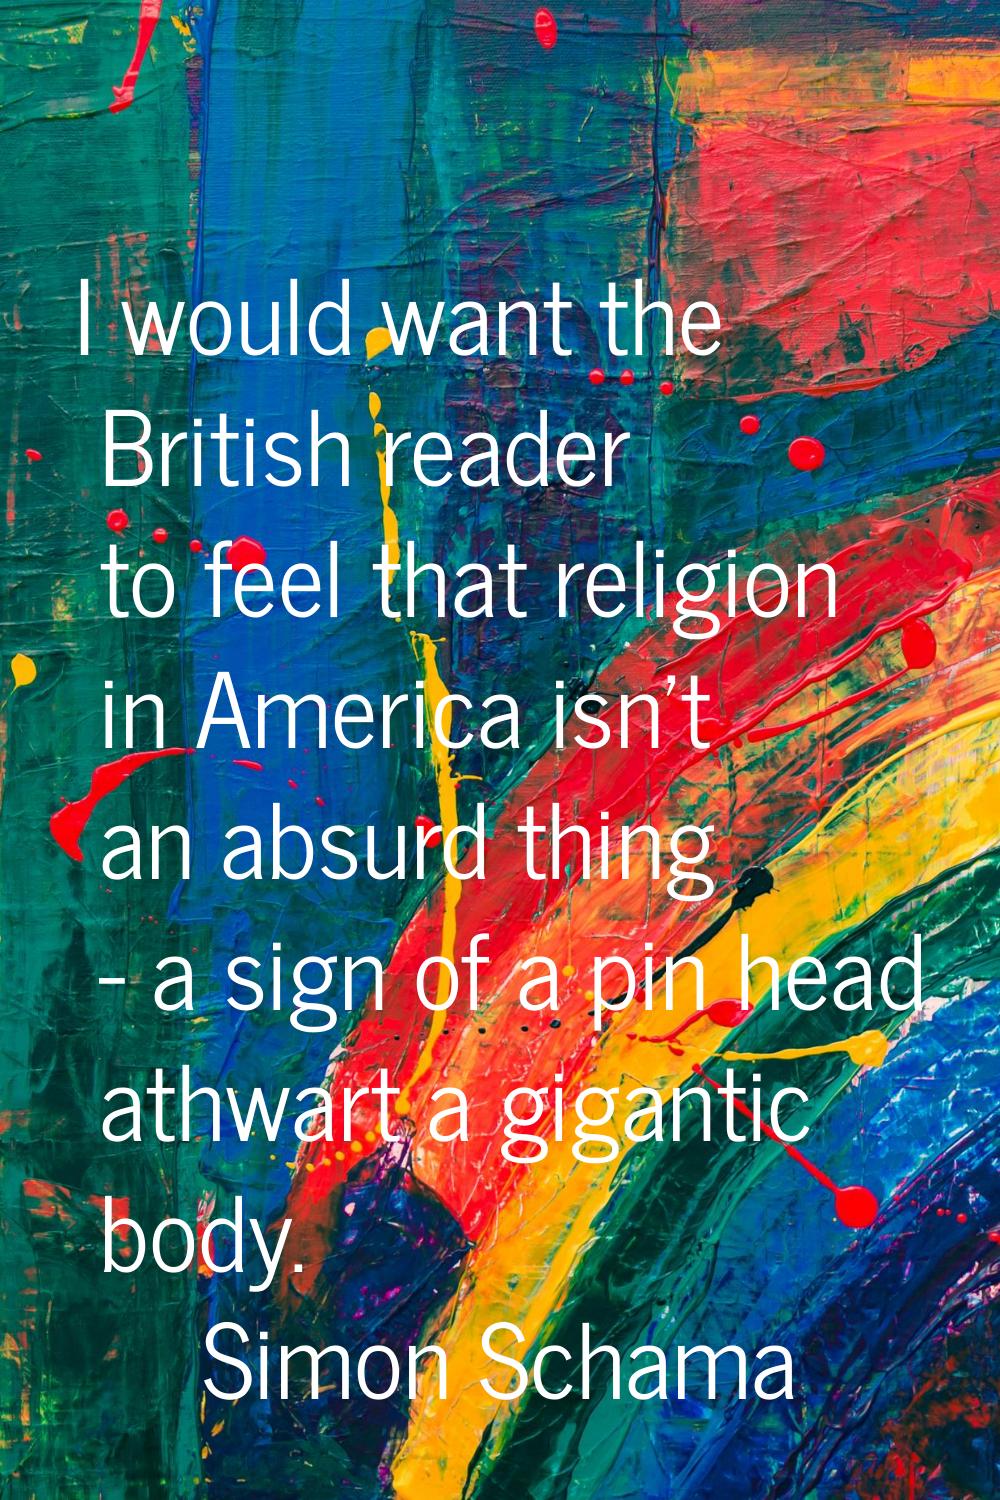 I would want the British reader to feel that religion in America isn't an absurd thing - a sign of 